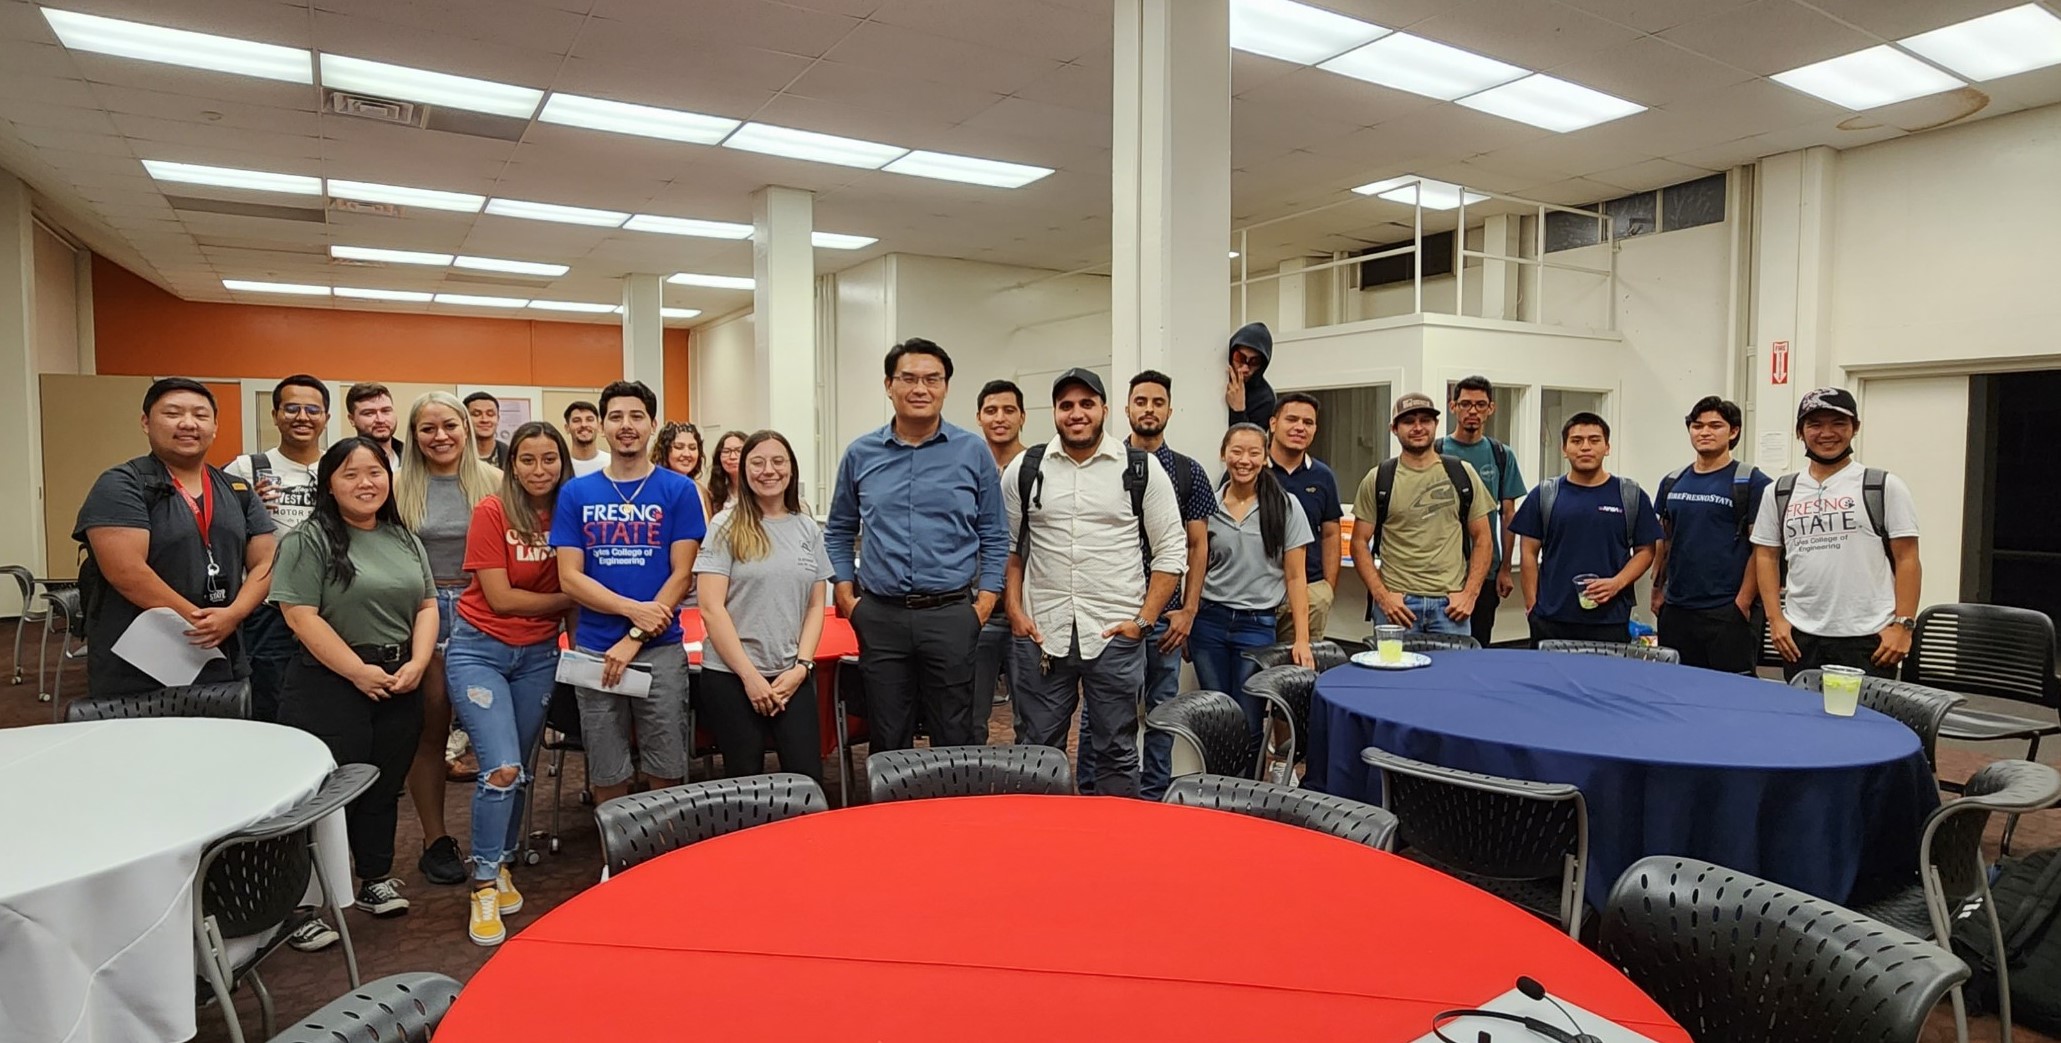 Dr. Ching Chiaw Choo visited ASCE Student Chapter and gave a presentation on railroad to the group